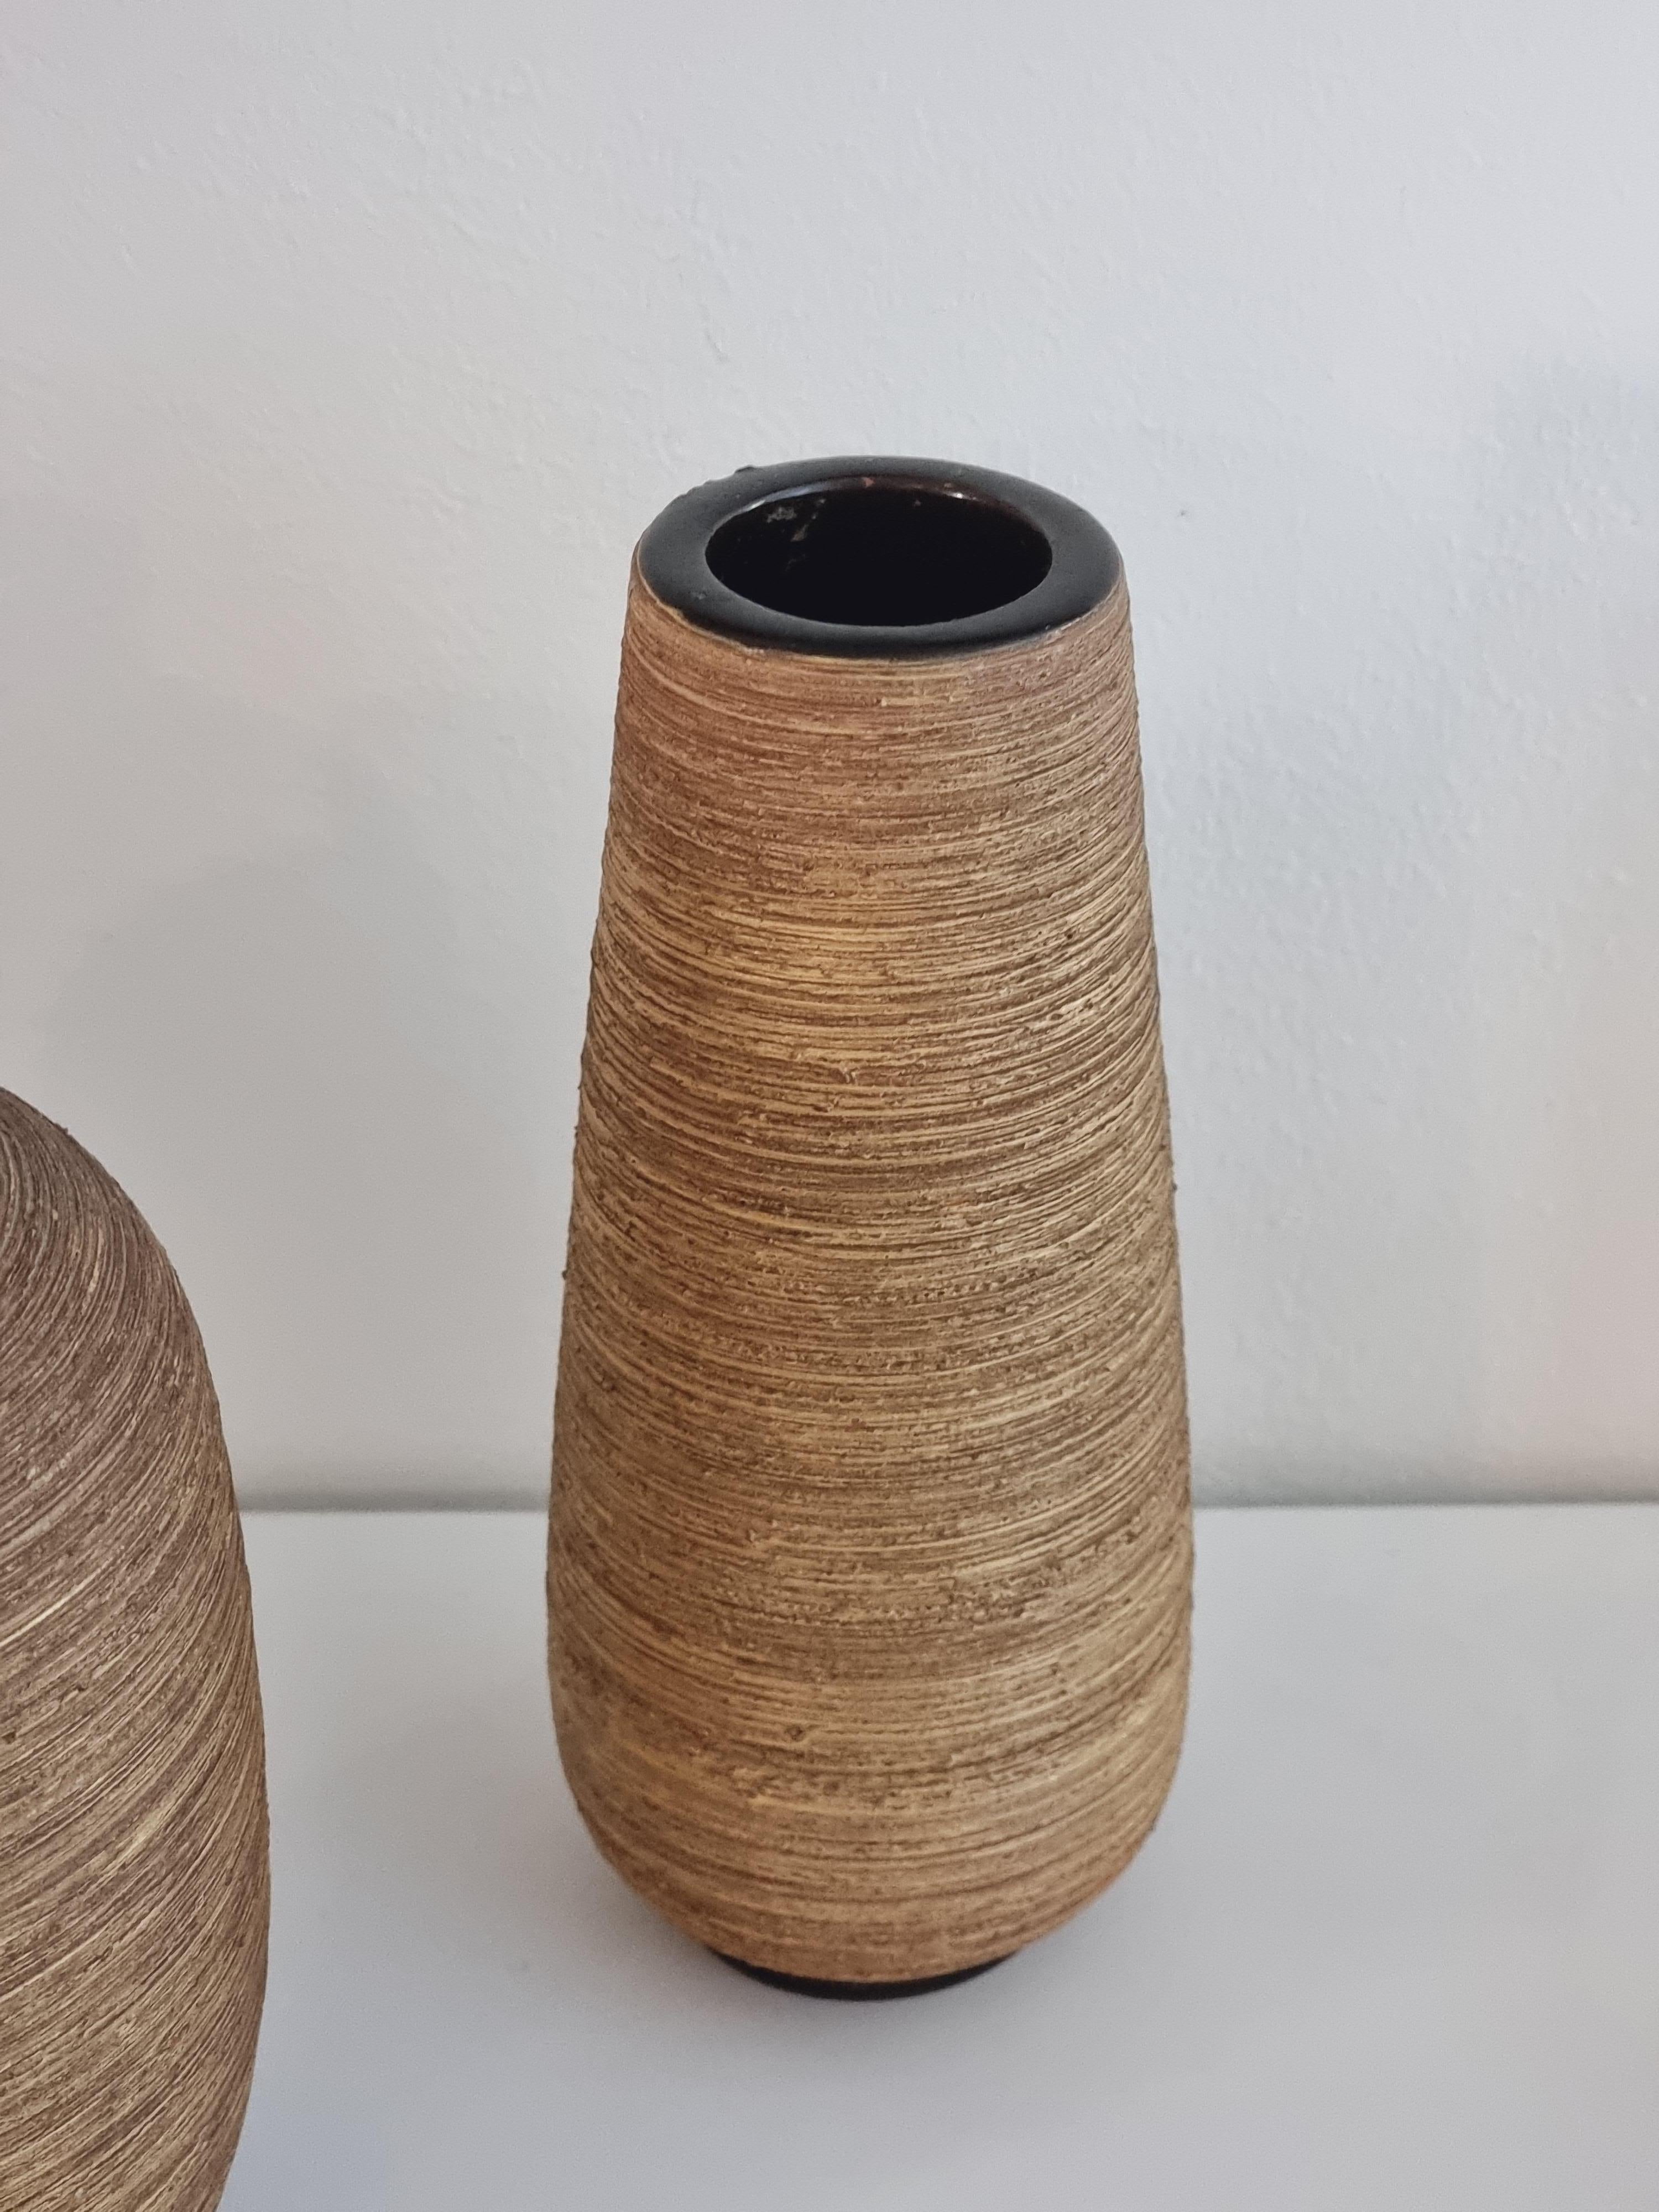 20th Century Set with Two Ceramic Vases by Greta Runeborg for Ekeby, Scandinavian Modern For Sale